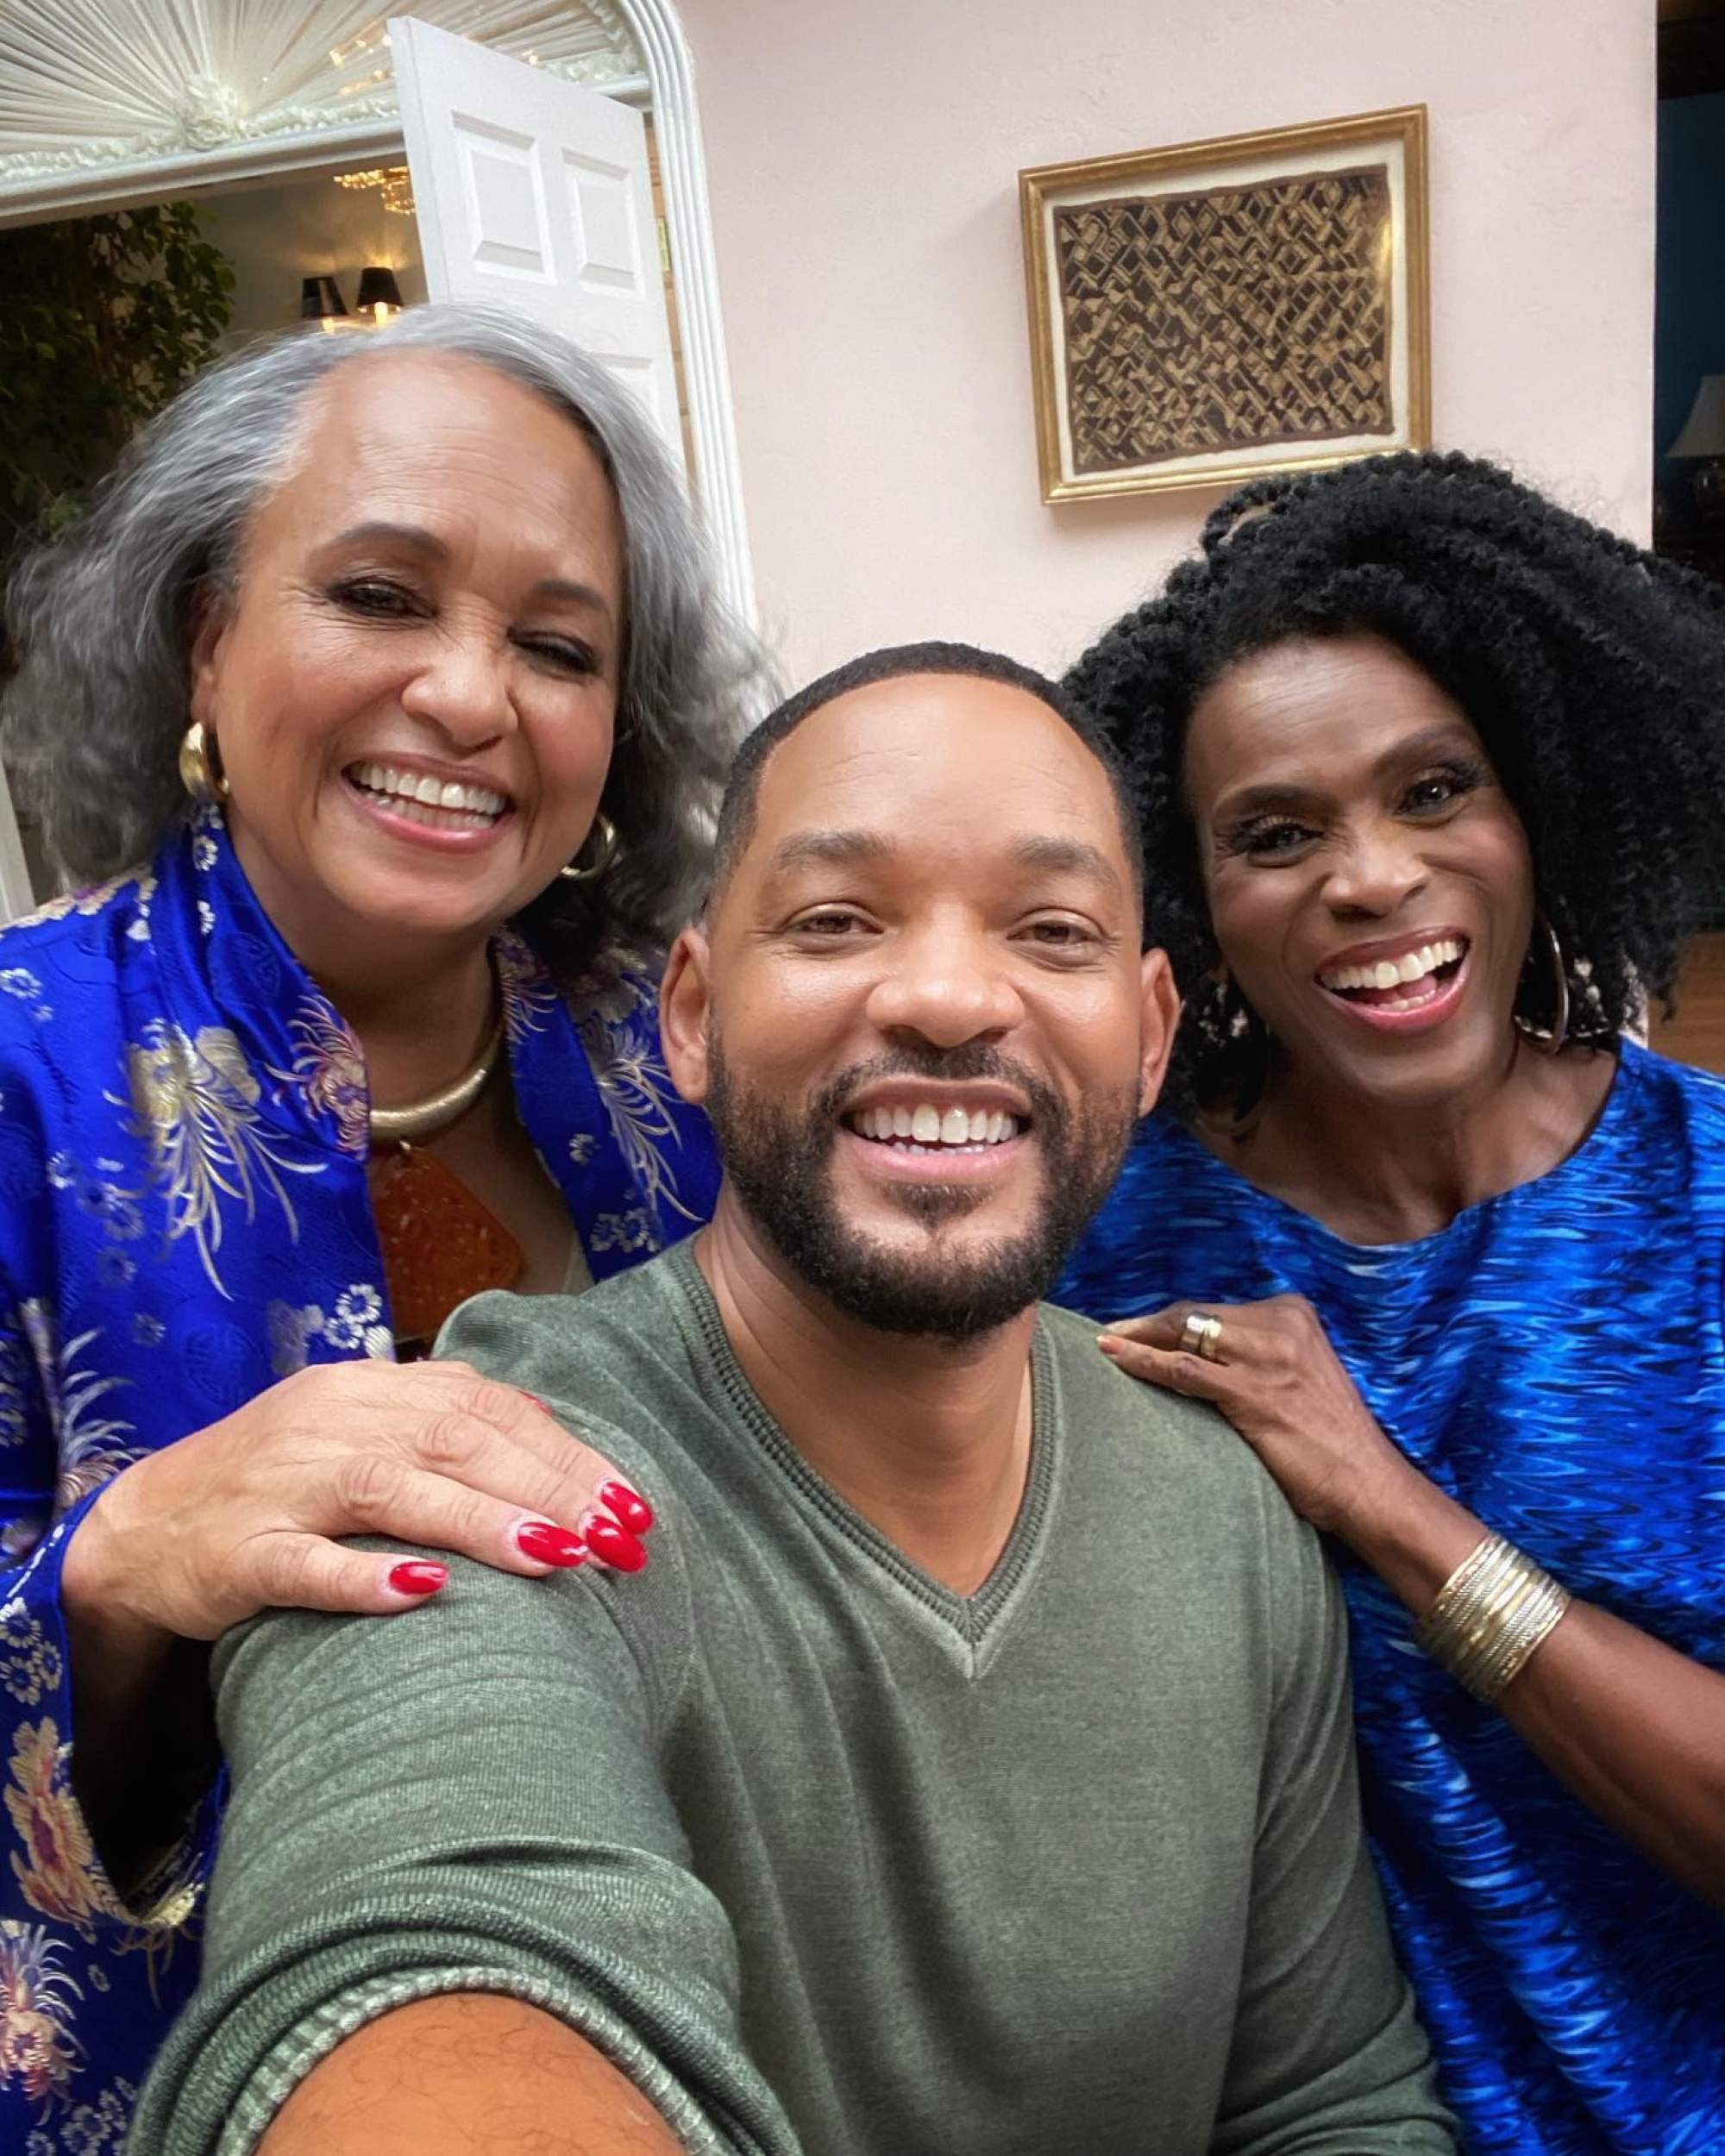 Will Smith with Daphne Maxwell Reid and Janet Hubert, who both played Aunt Vivian in The Fresh Prince of Bel-Air. Photo: @willsmith/Instagram